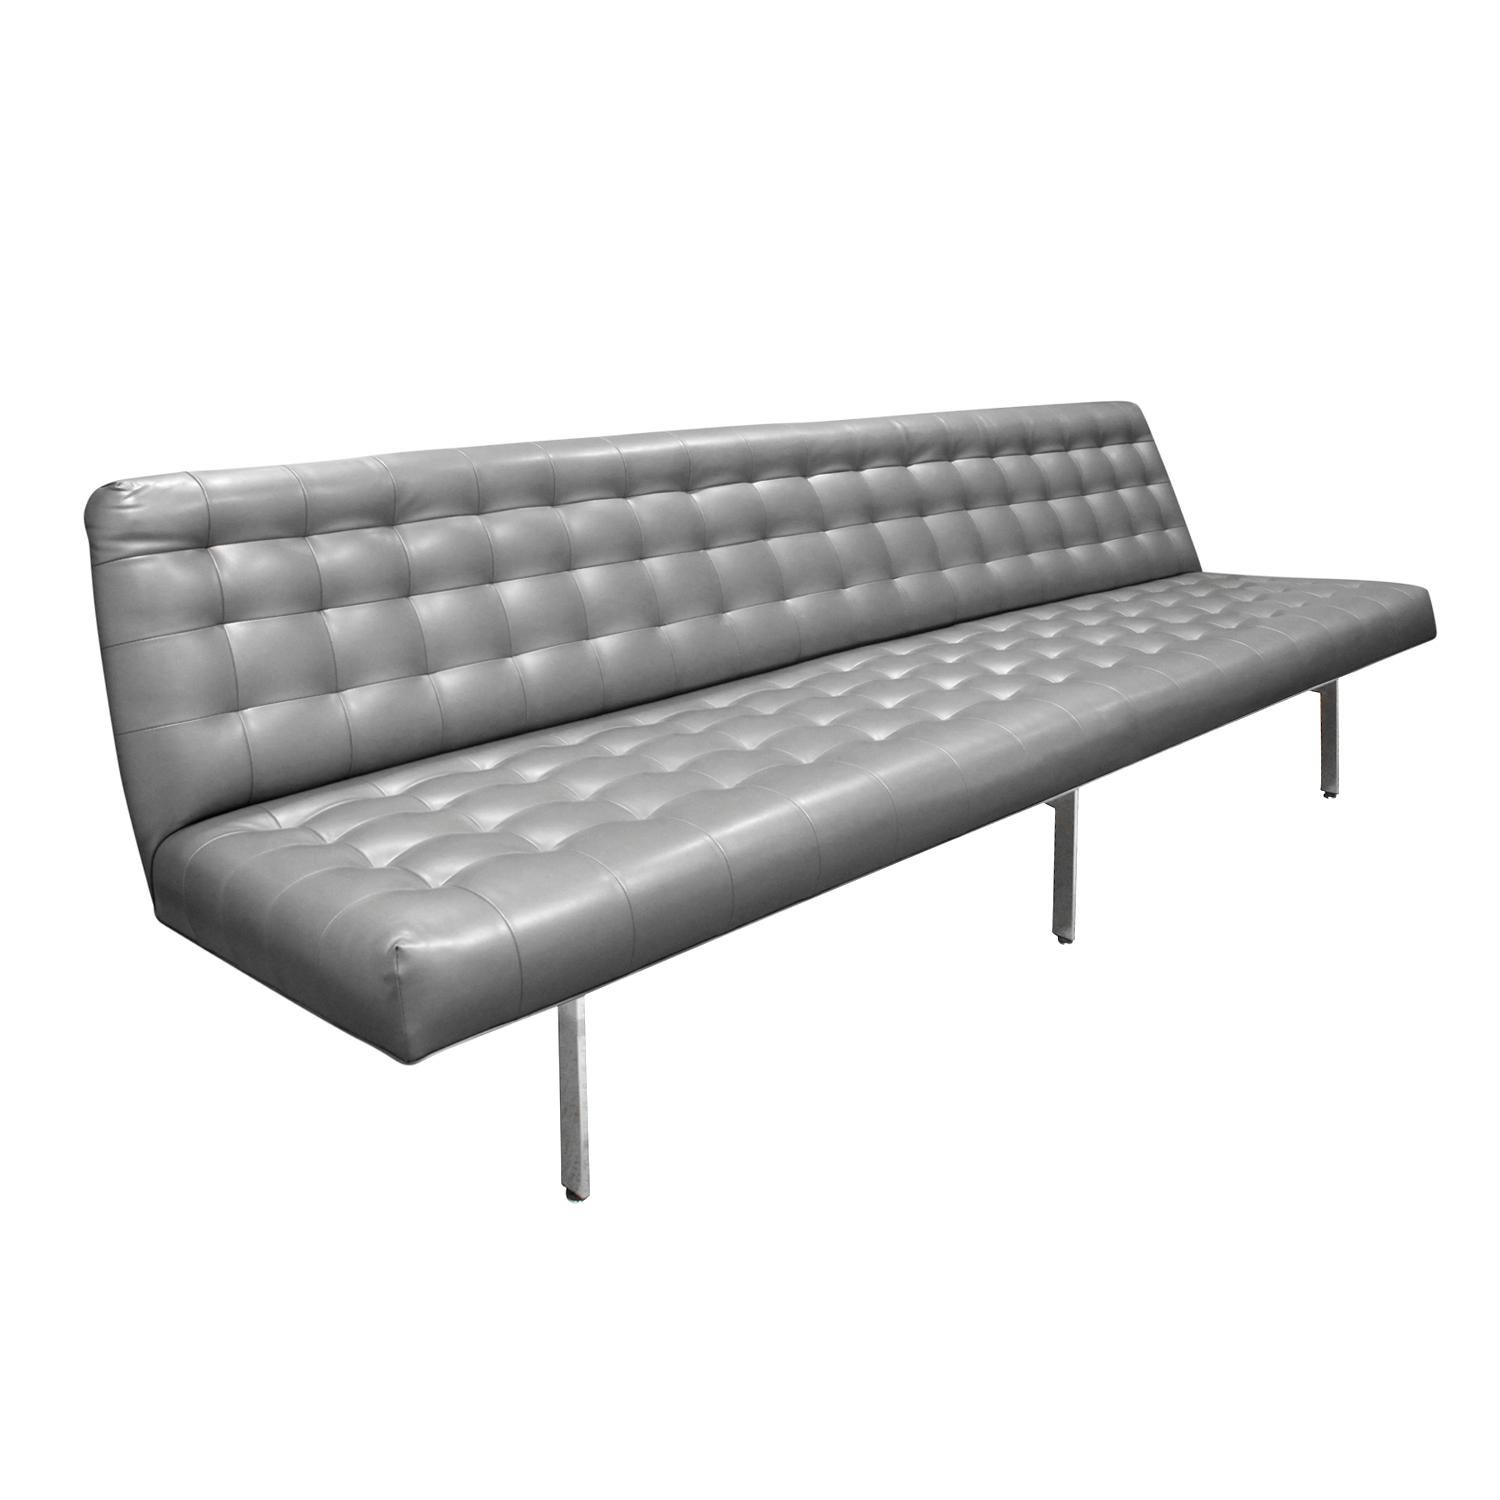 Long slipper sofa in box tufted silver satin hernatite vinyl with chrome base by Milo Baughman for Thayer Coggin, American, 1970s. Clean design makes this piece both chic end elegant.